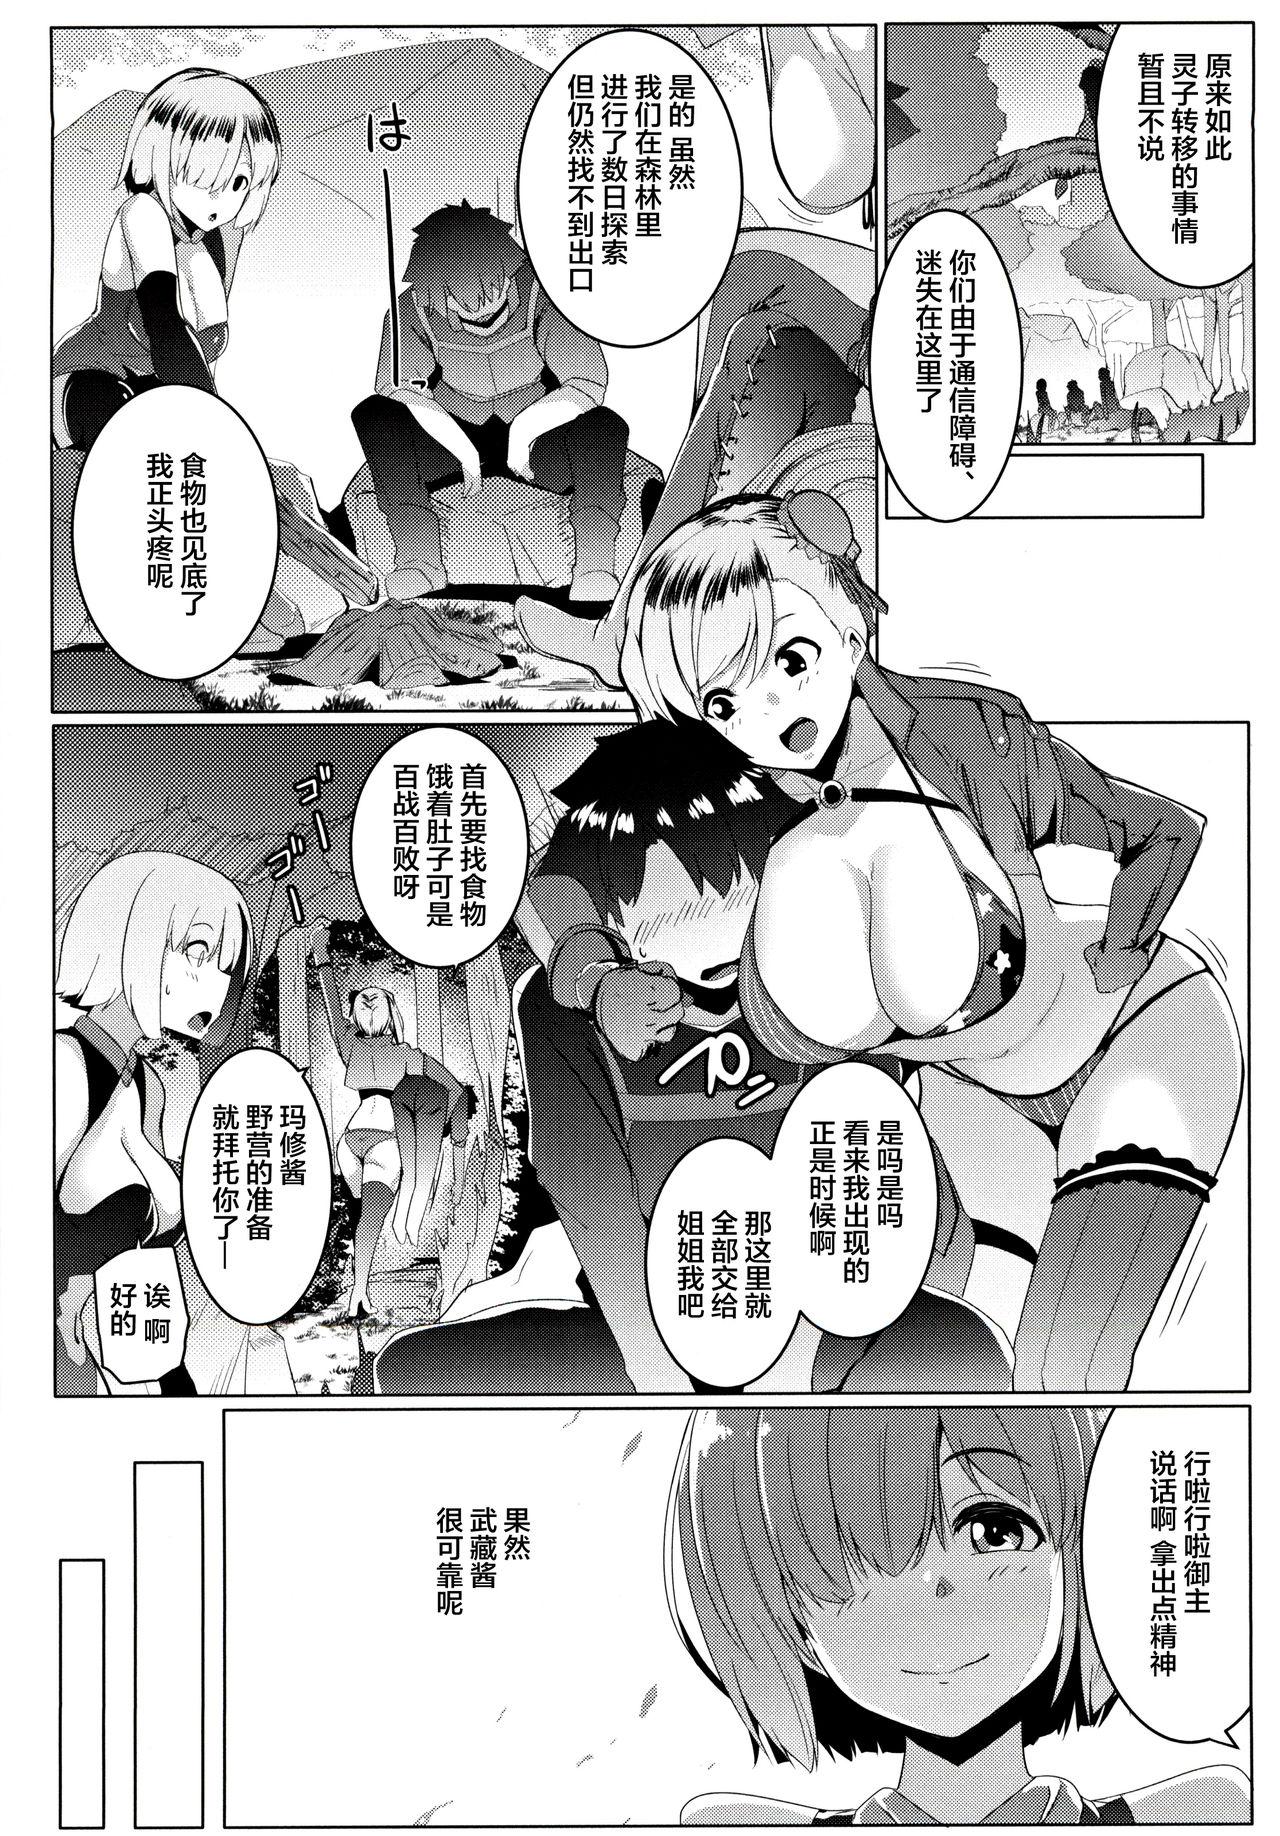 Ftvgirls Musashi-chan to PakoCam - Fate grand order Coeds - Page 5